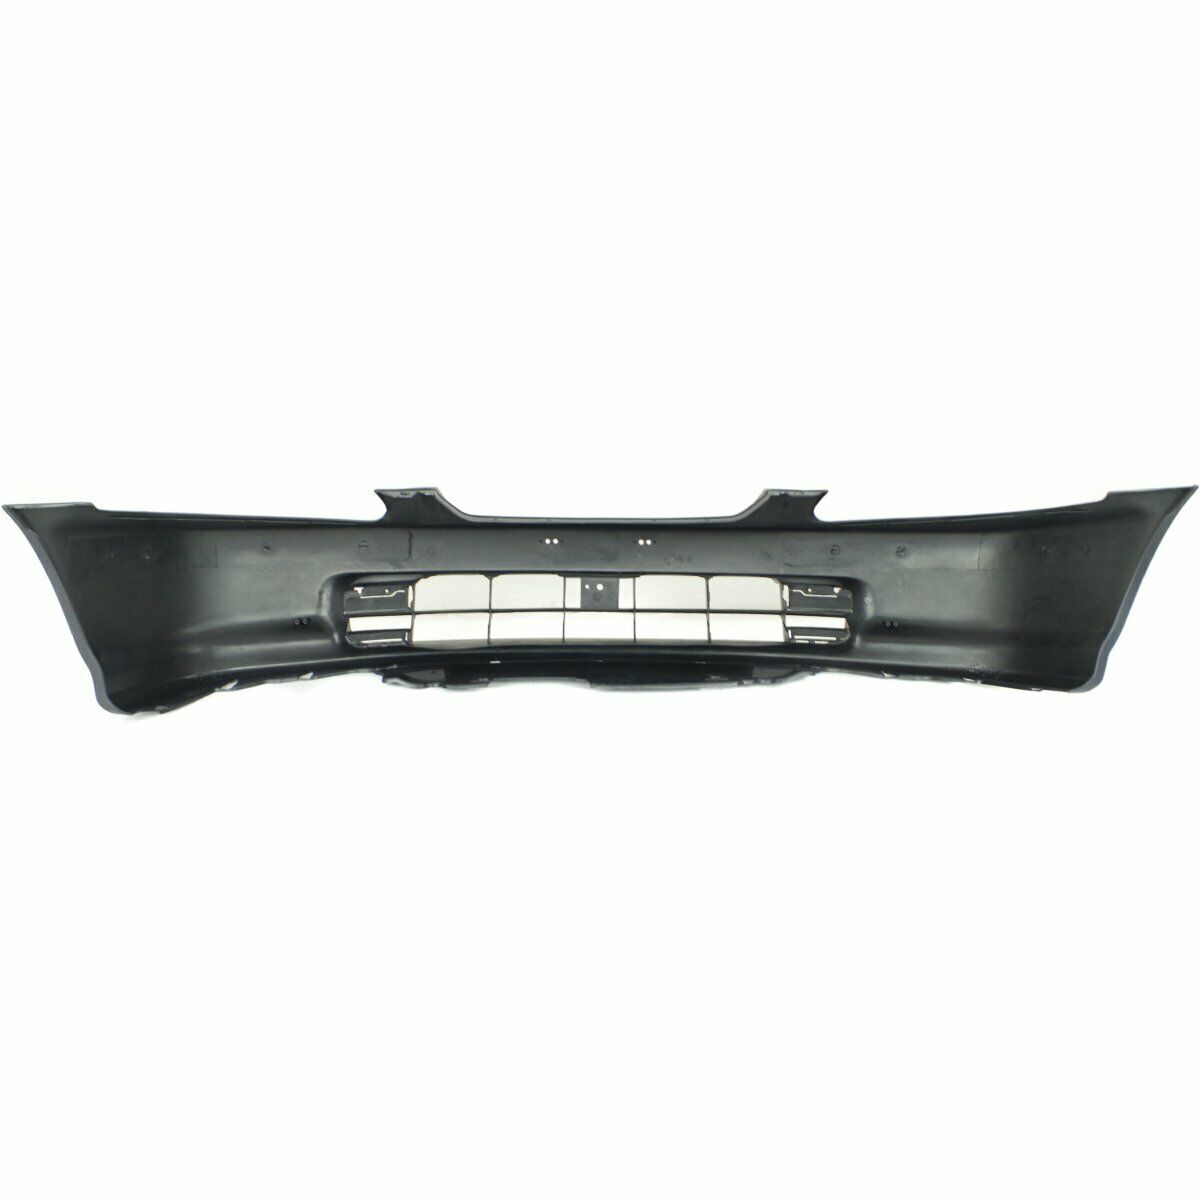 1996-1998 Honda Civic Coupe Front Bumper Painted to Match